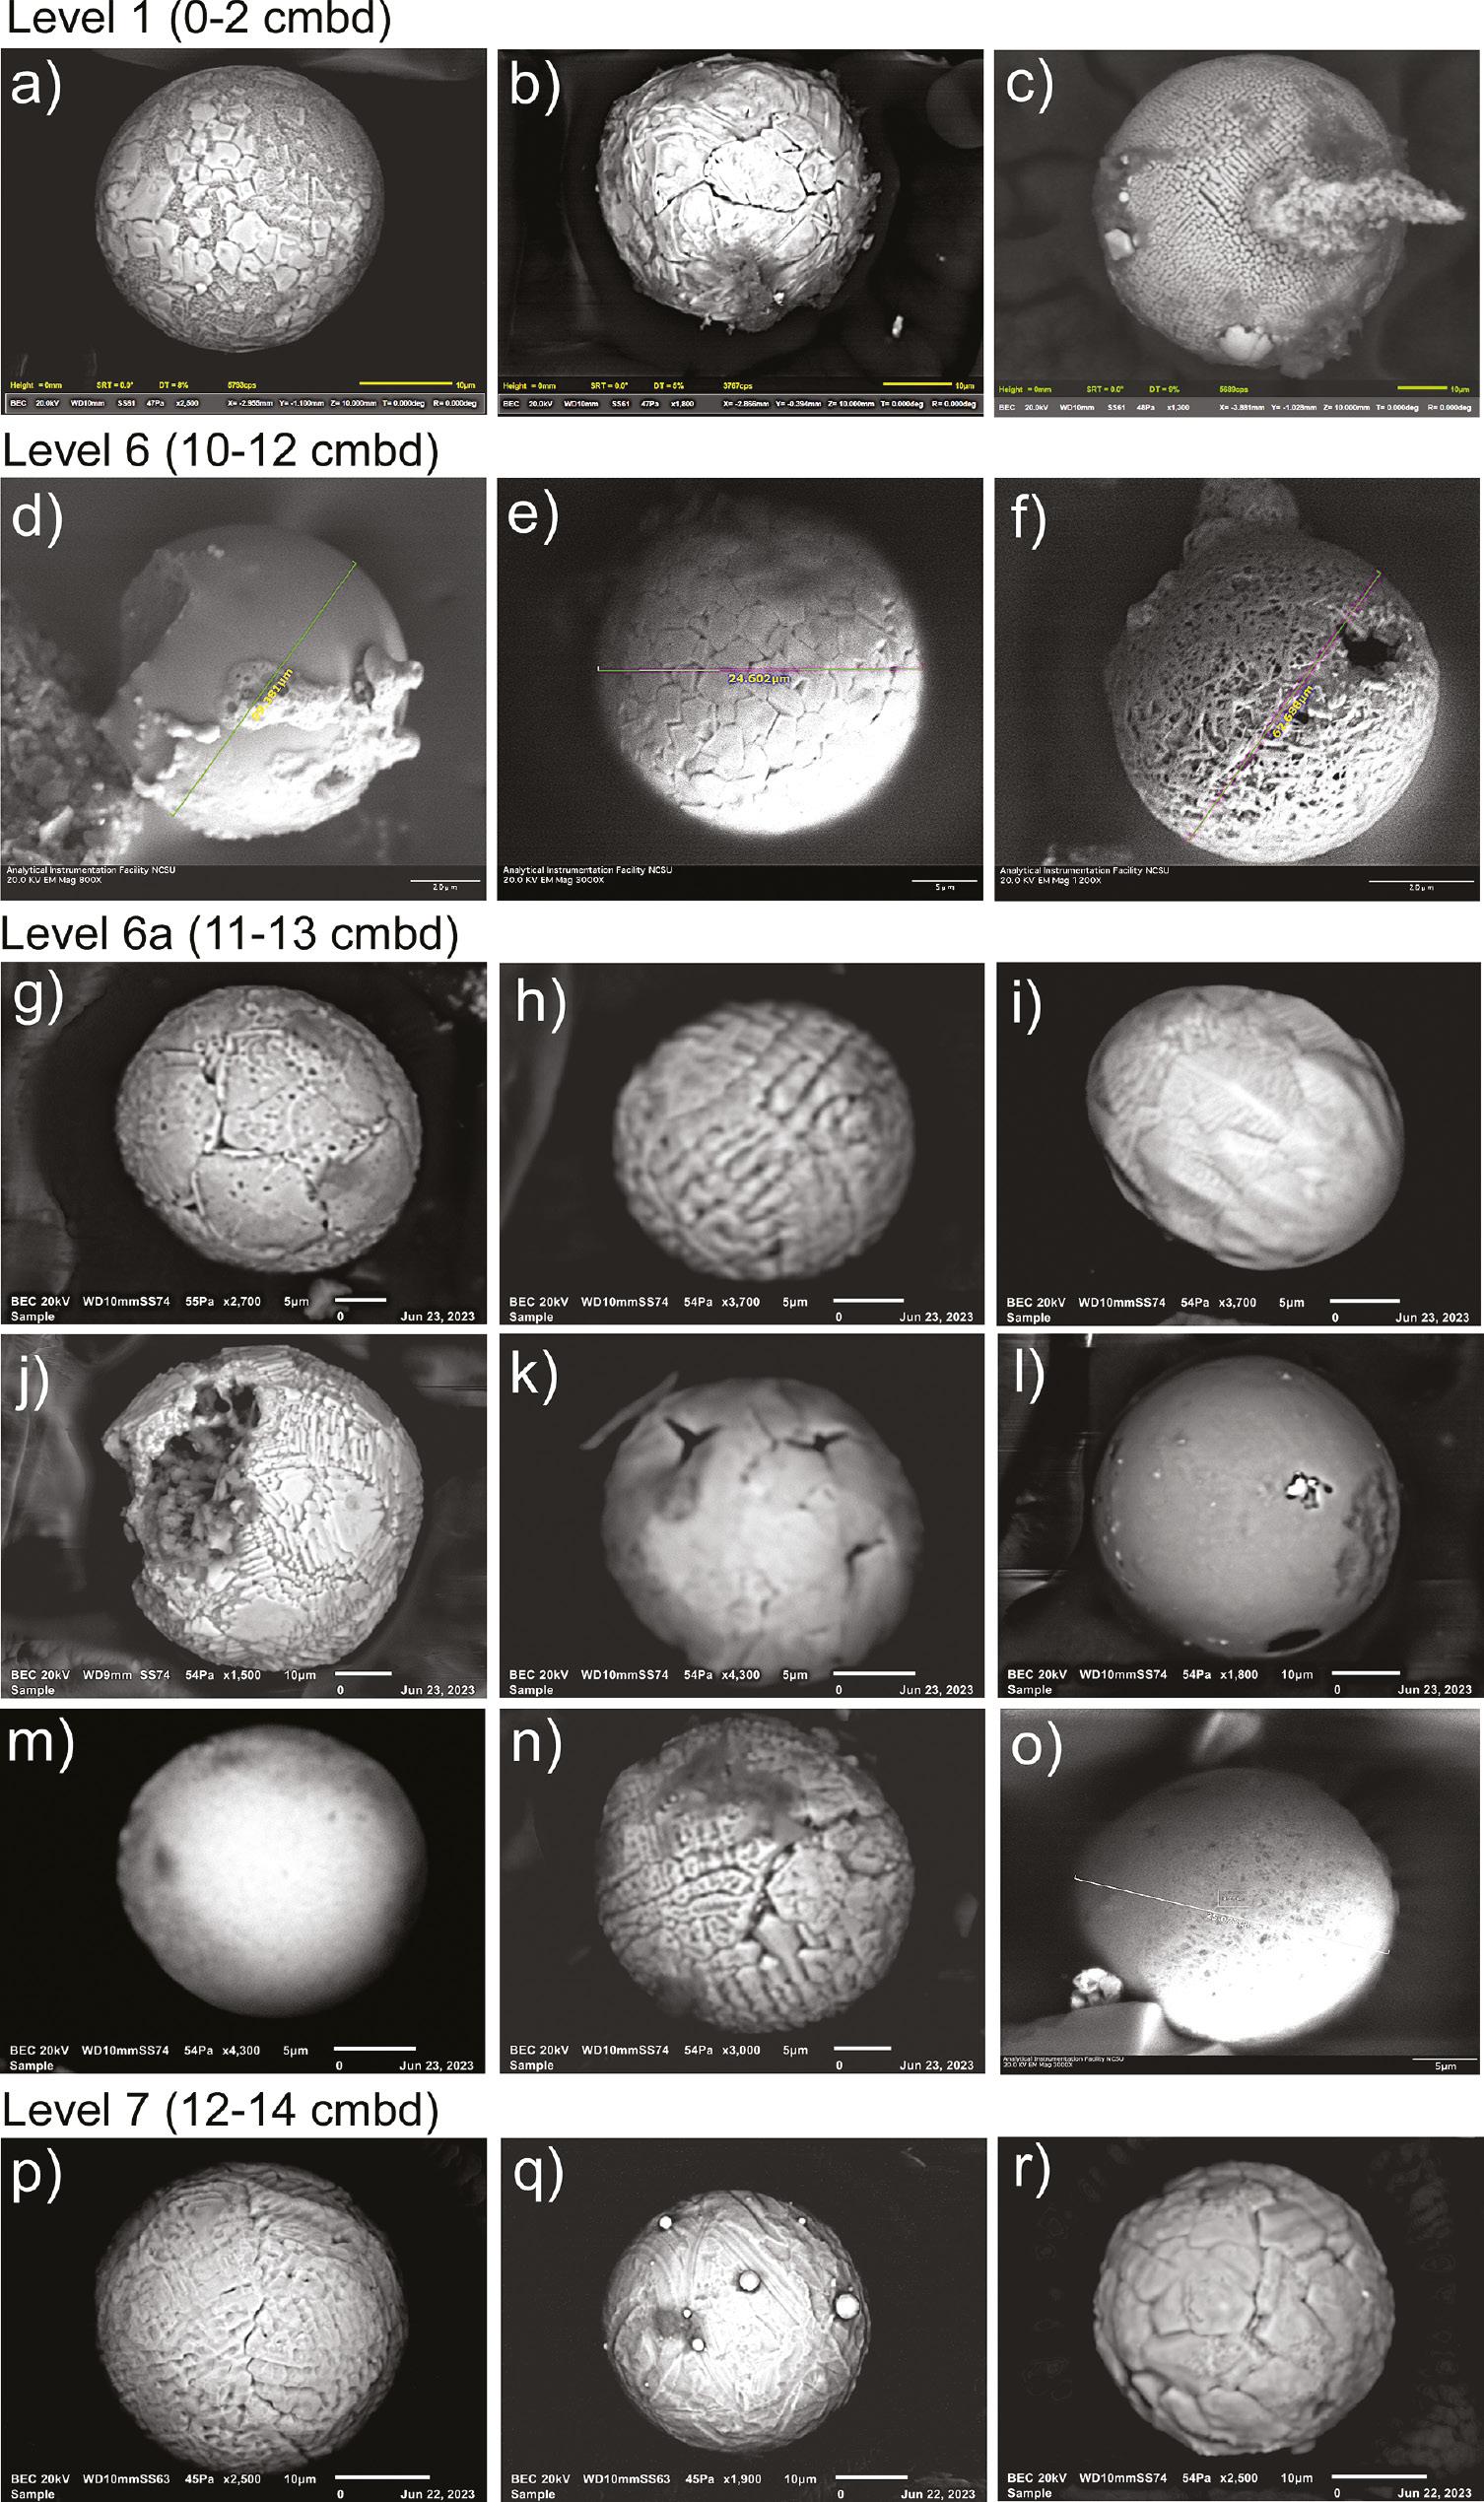 Examples of magnetic microspherules from Newtonville recovered from the microstratigraphic sediment block samples (a-r) taken at 2-cm intervals (see Figures 5, 6, click on Supplementary Information Table 1, and Supplementary Information Figures 4–20). Microspherule abundances (e.g., 13/kg) are much lower above and below the YDB peak (4483/kg) (click on Supplementary Information Table 1), and their presence likely results from redeposition. Microspherule surface features are variable, with most exhibiting dendritic patterns.